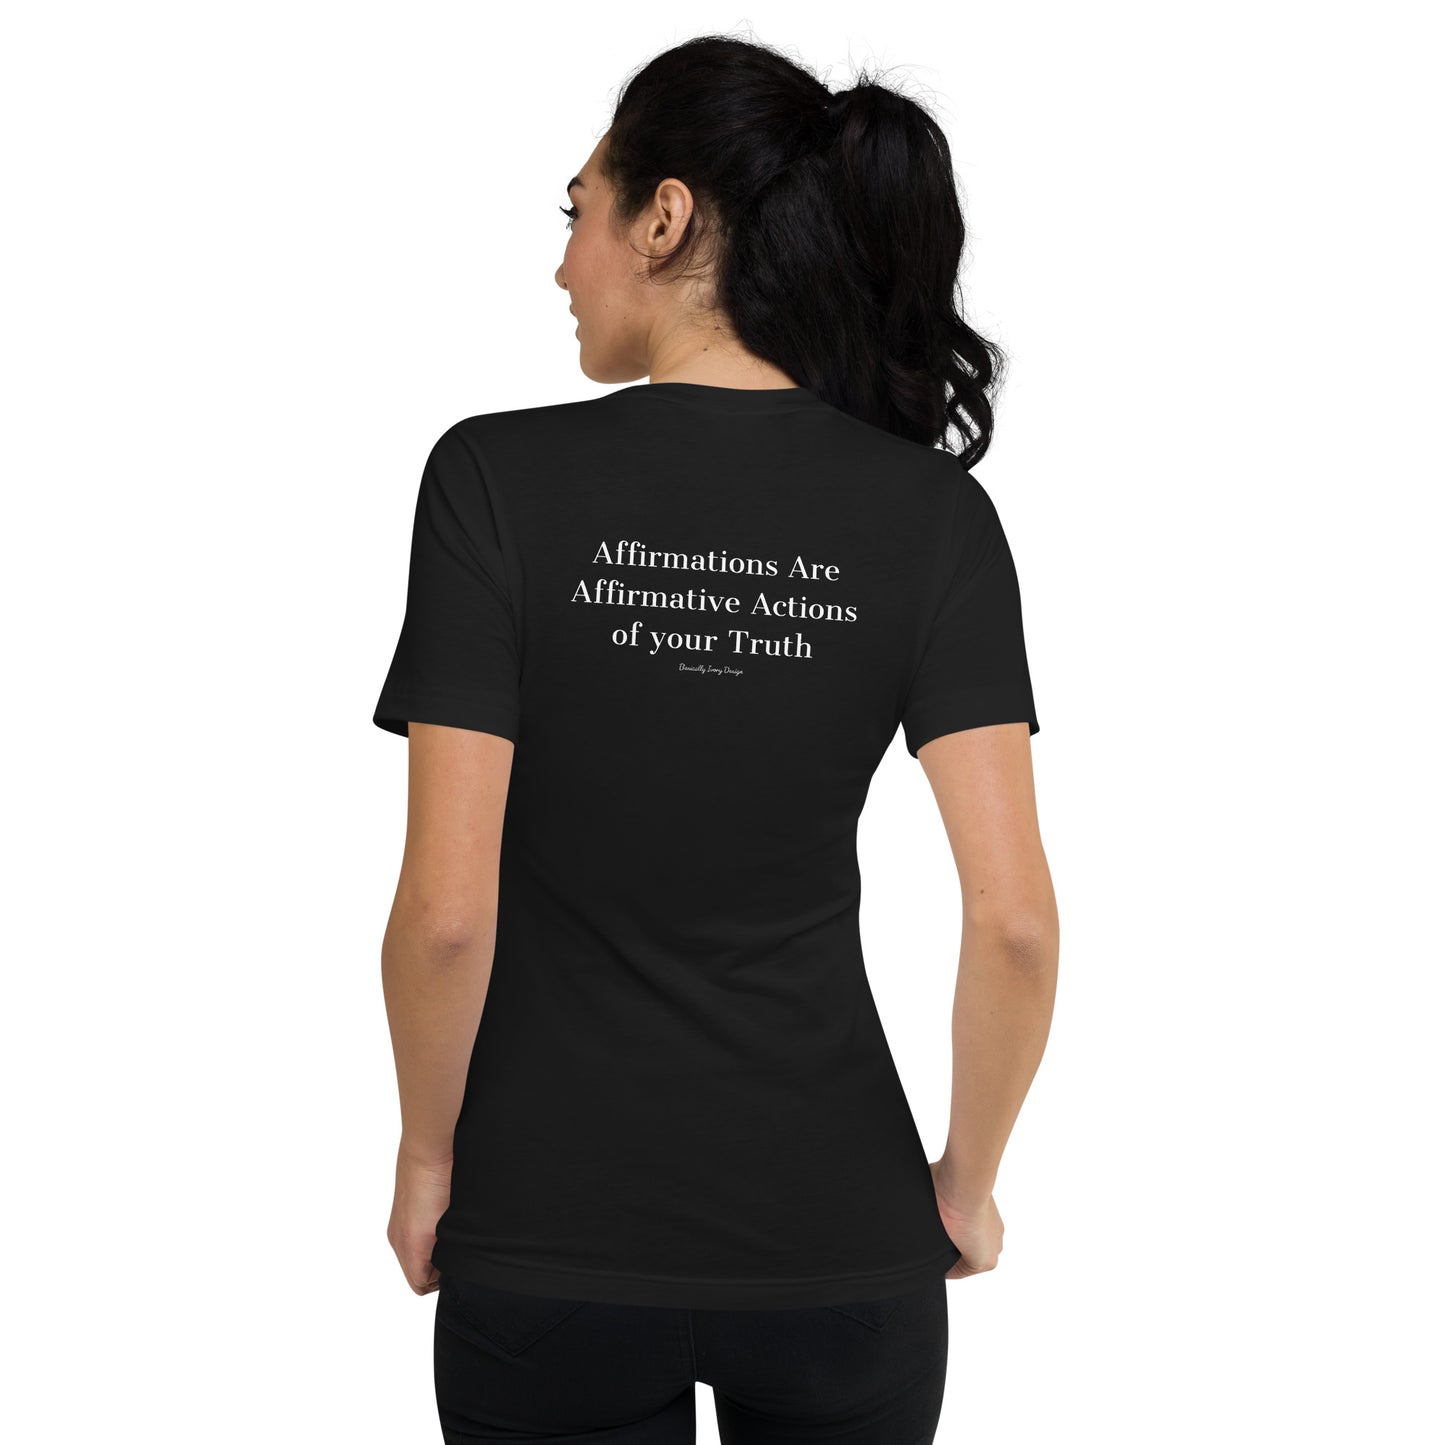 I make a difference in the world Unisex Short Sleeve V-Neck T-Shirt